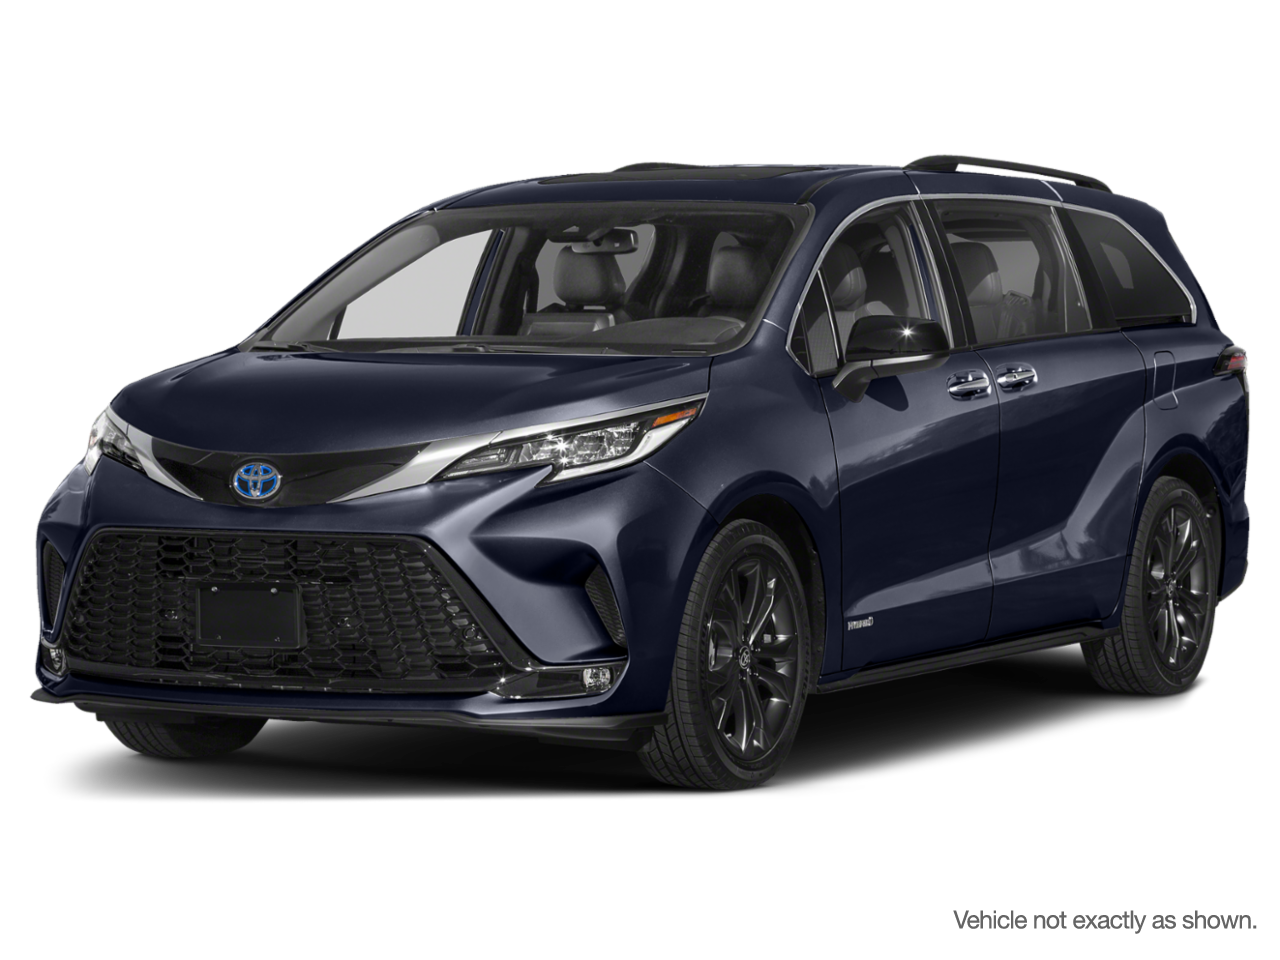 2022 Toyota Sienna Sienna XSE AWD 7-Pass | Technology Package |